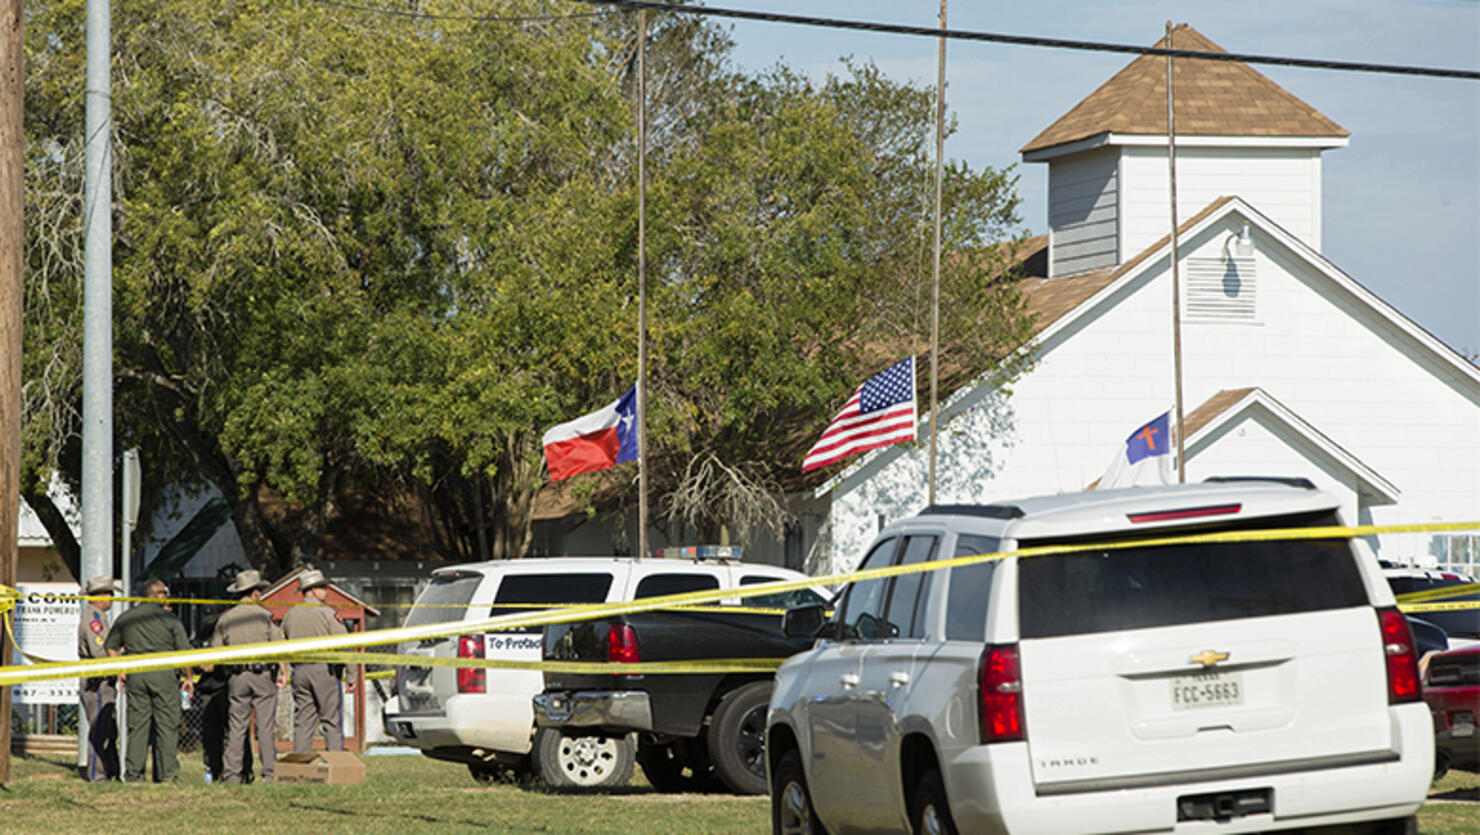 Law enforcement officials gather near the First Baptist Church following a shooting on November 5, 2017 in Sutherland Springs, Texas